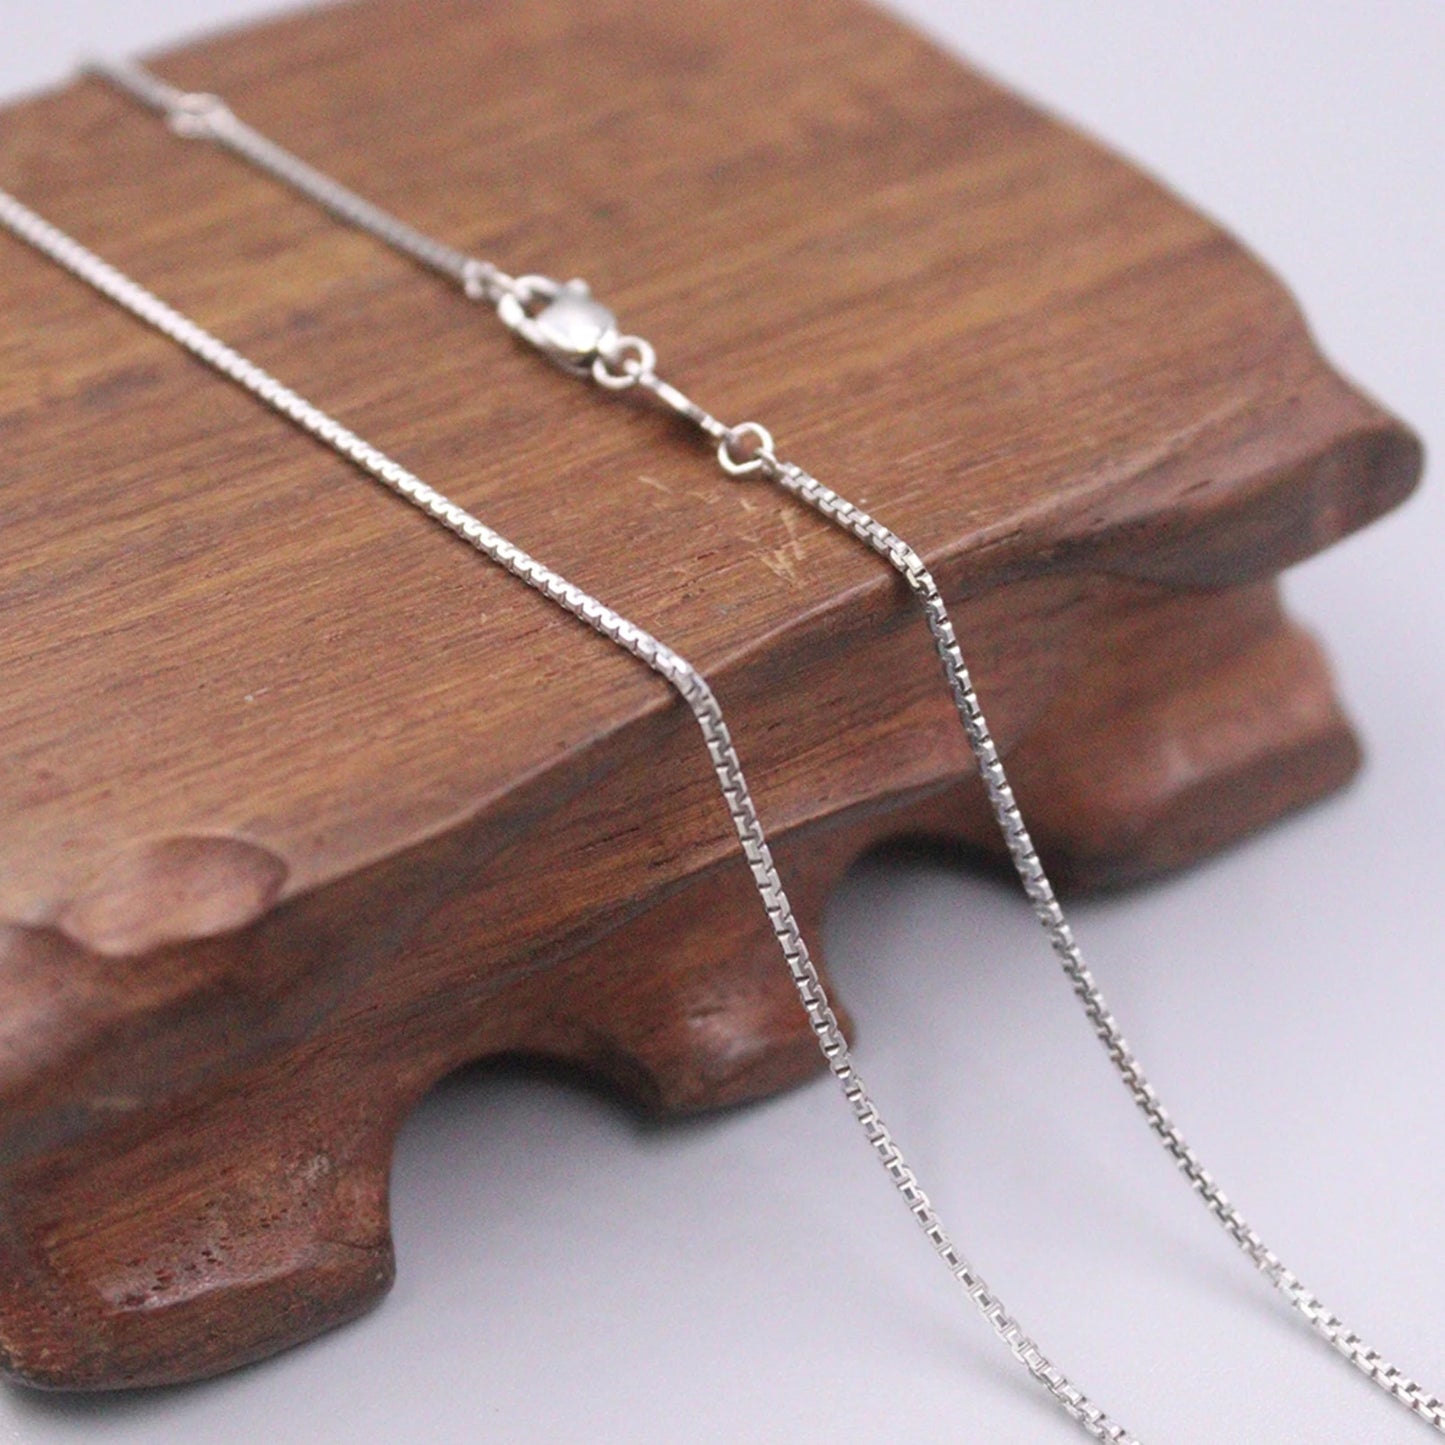 Authentic PURE PLATINUM 950 Necklace - The Perfect Gift